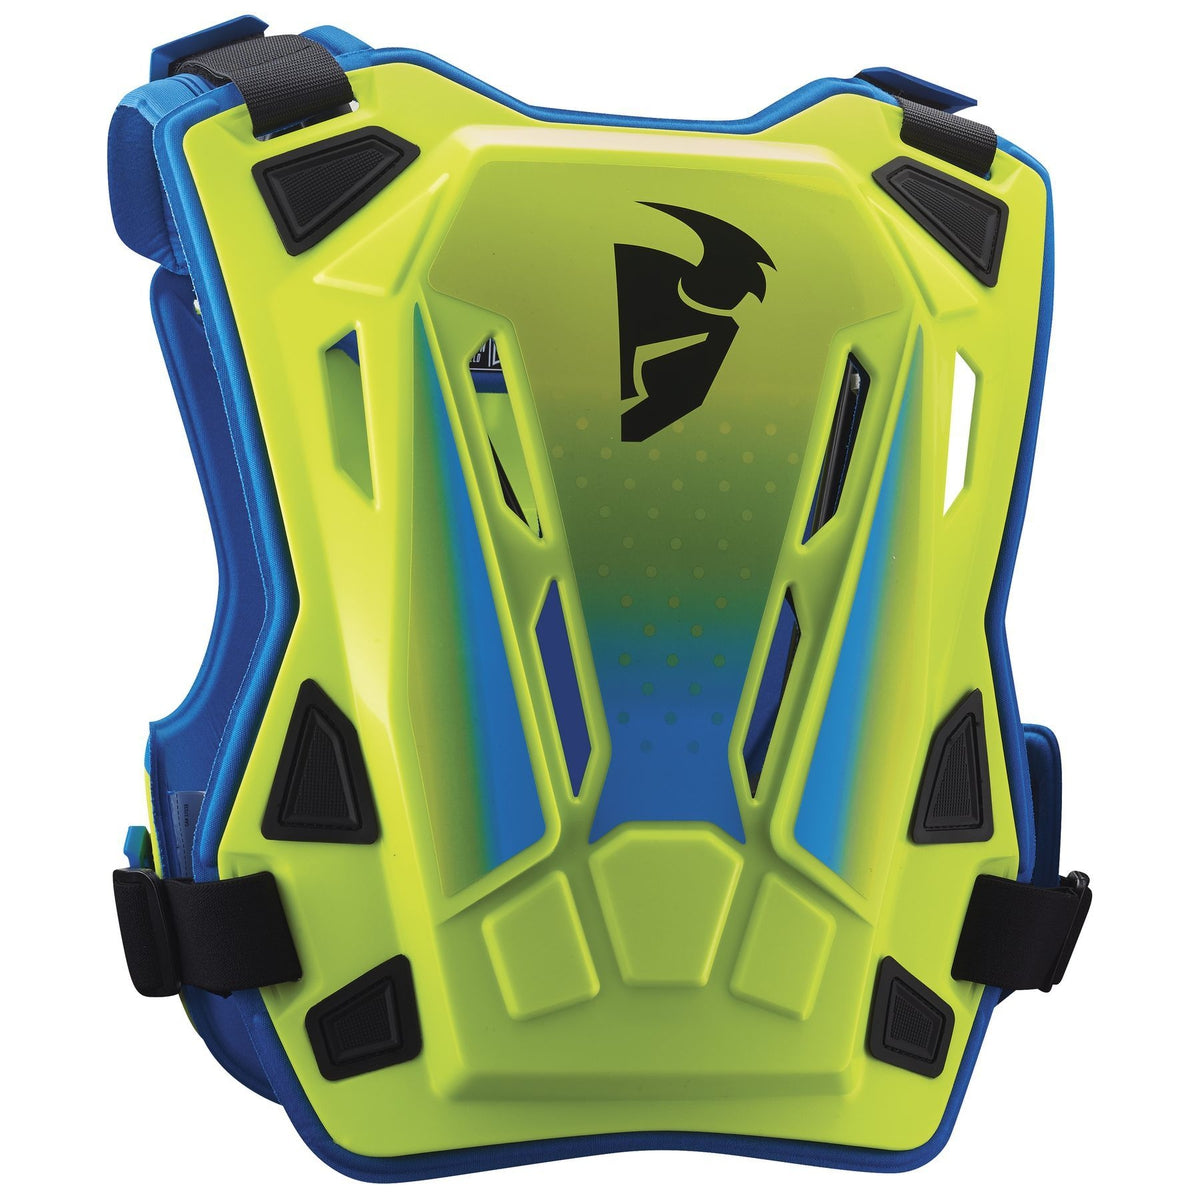 Thor Youth Guardian MX Roost Deflector - PeakBoys